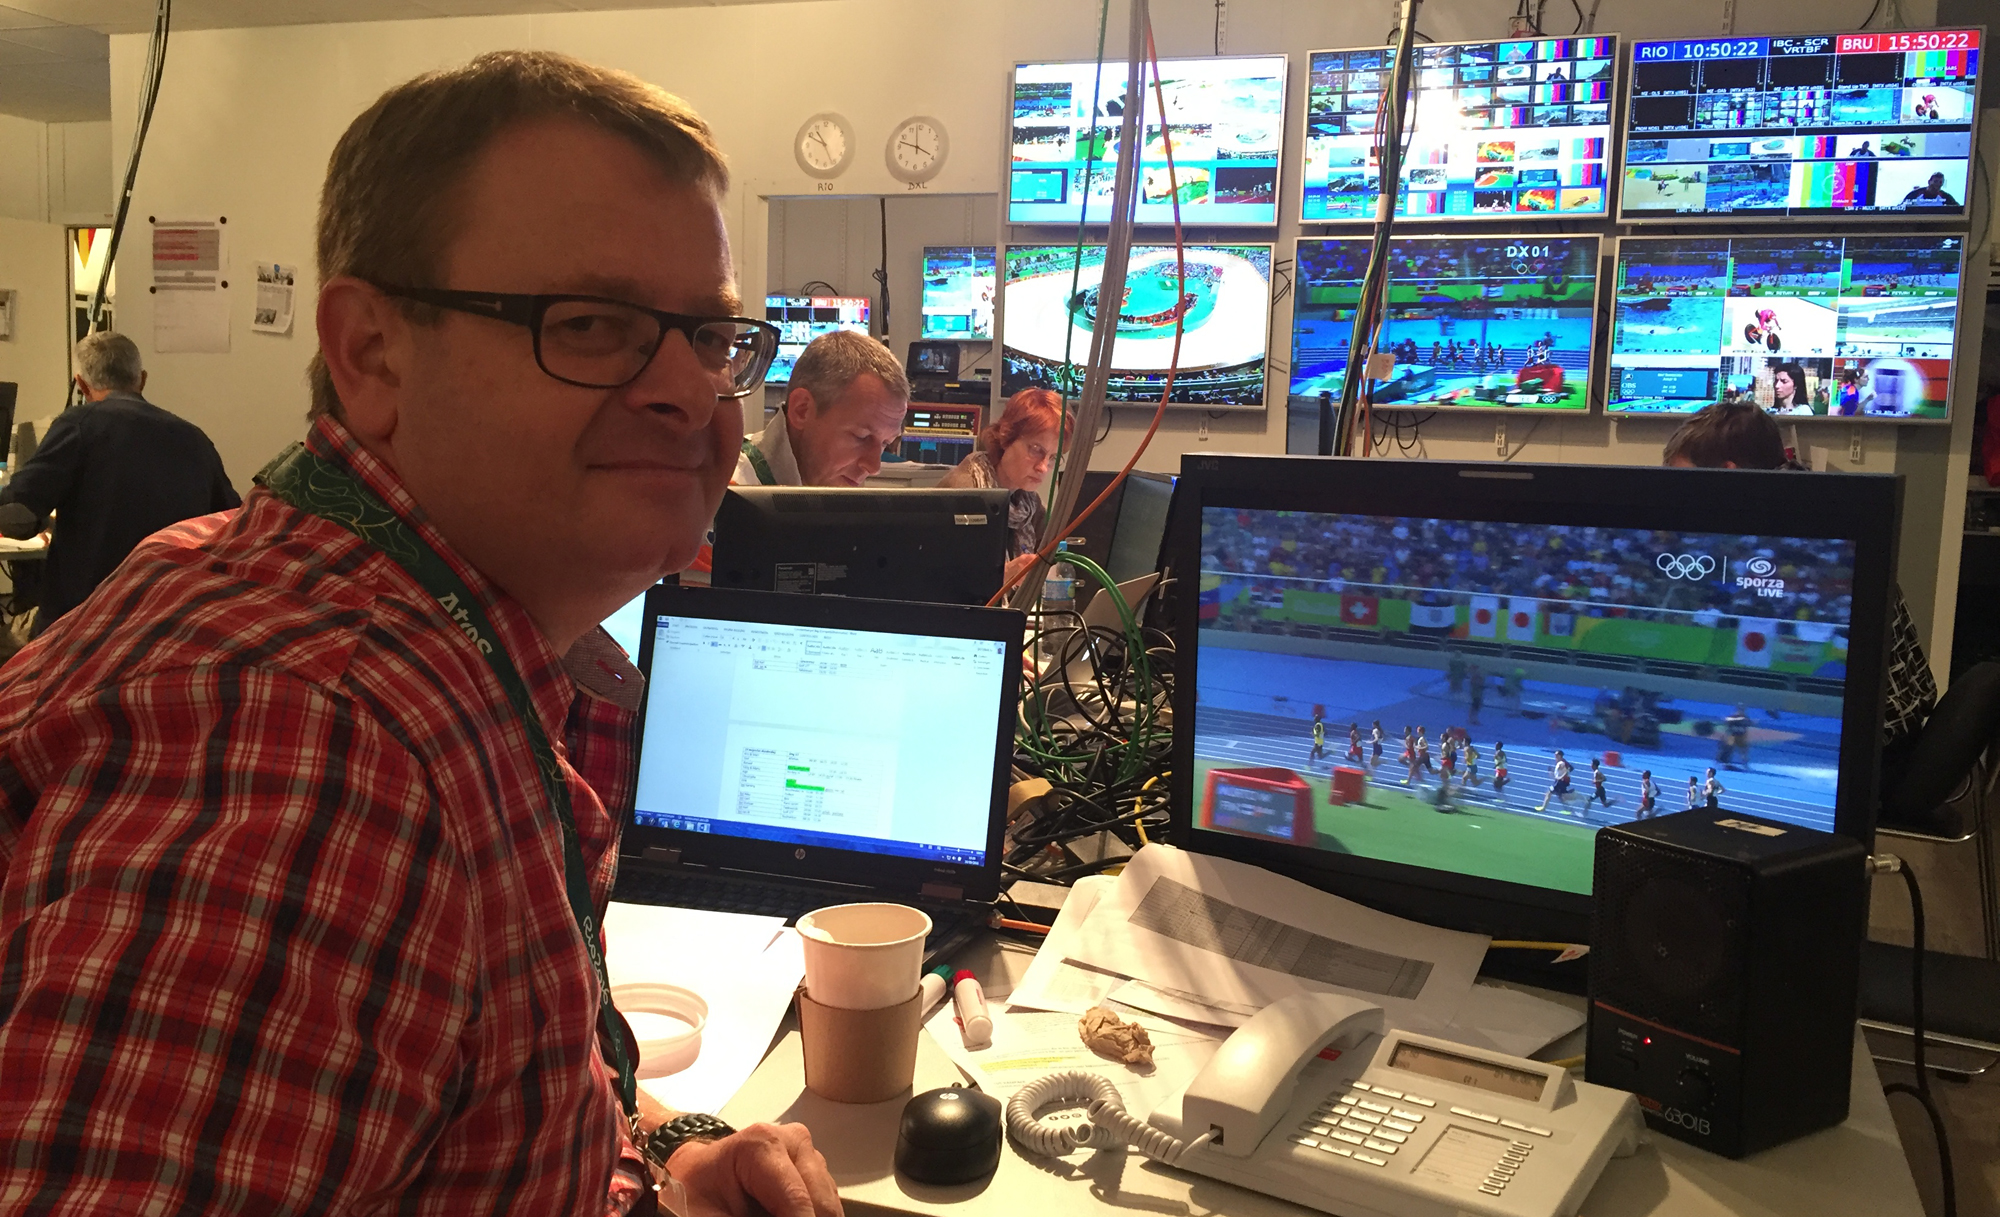 Lead producer Jo Deferme oversees the Olympic production of Belgian broadcaster VRT at the IBC in Rio.